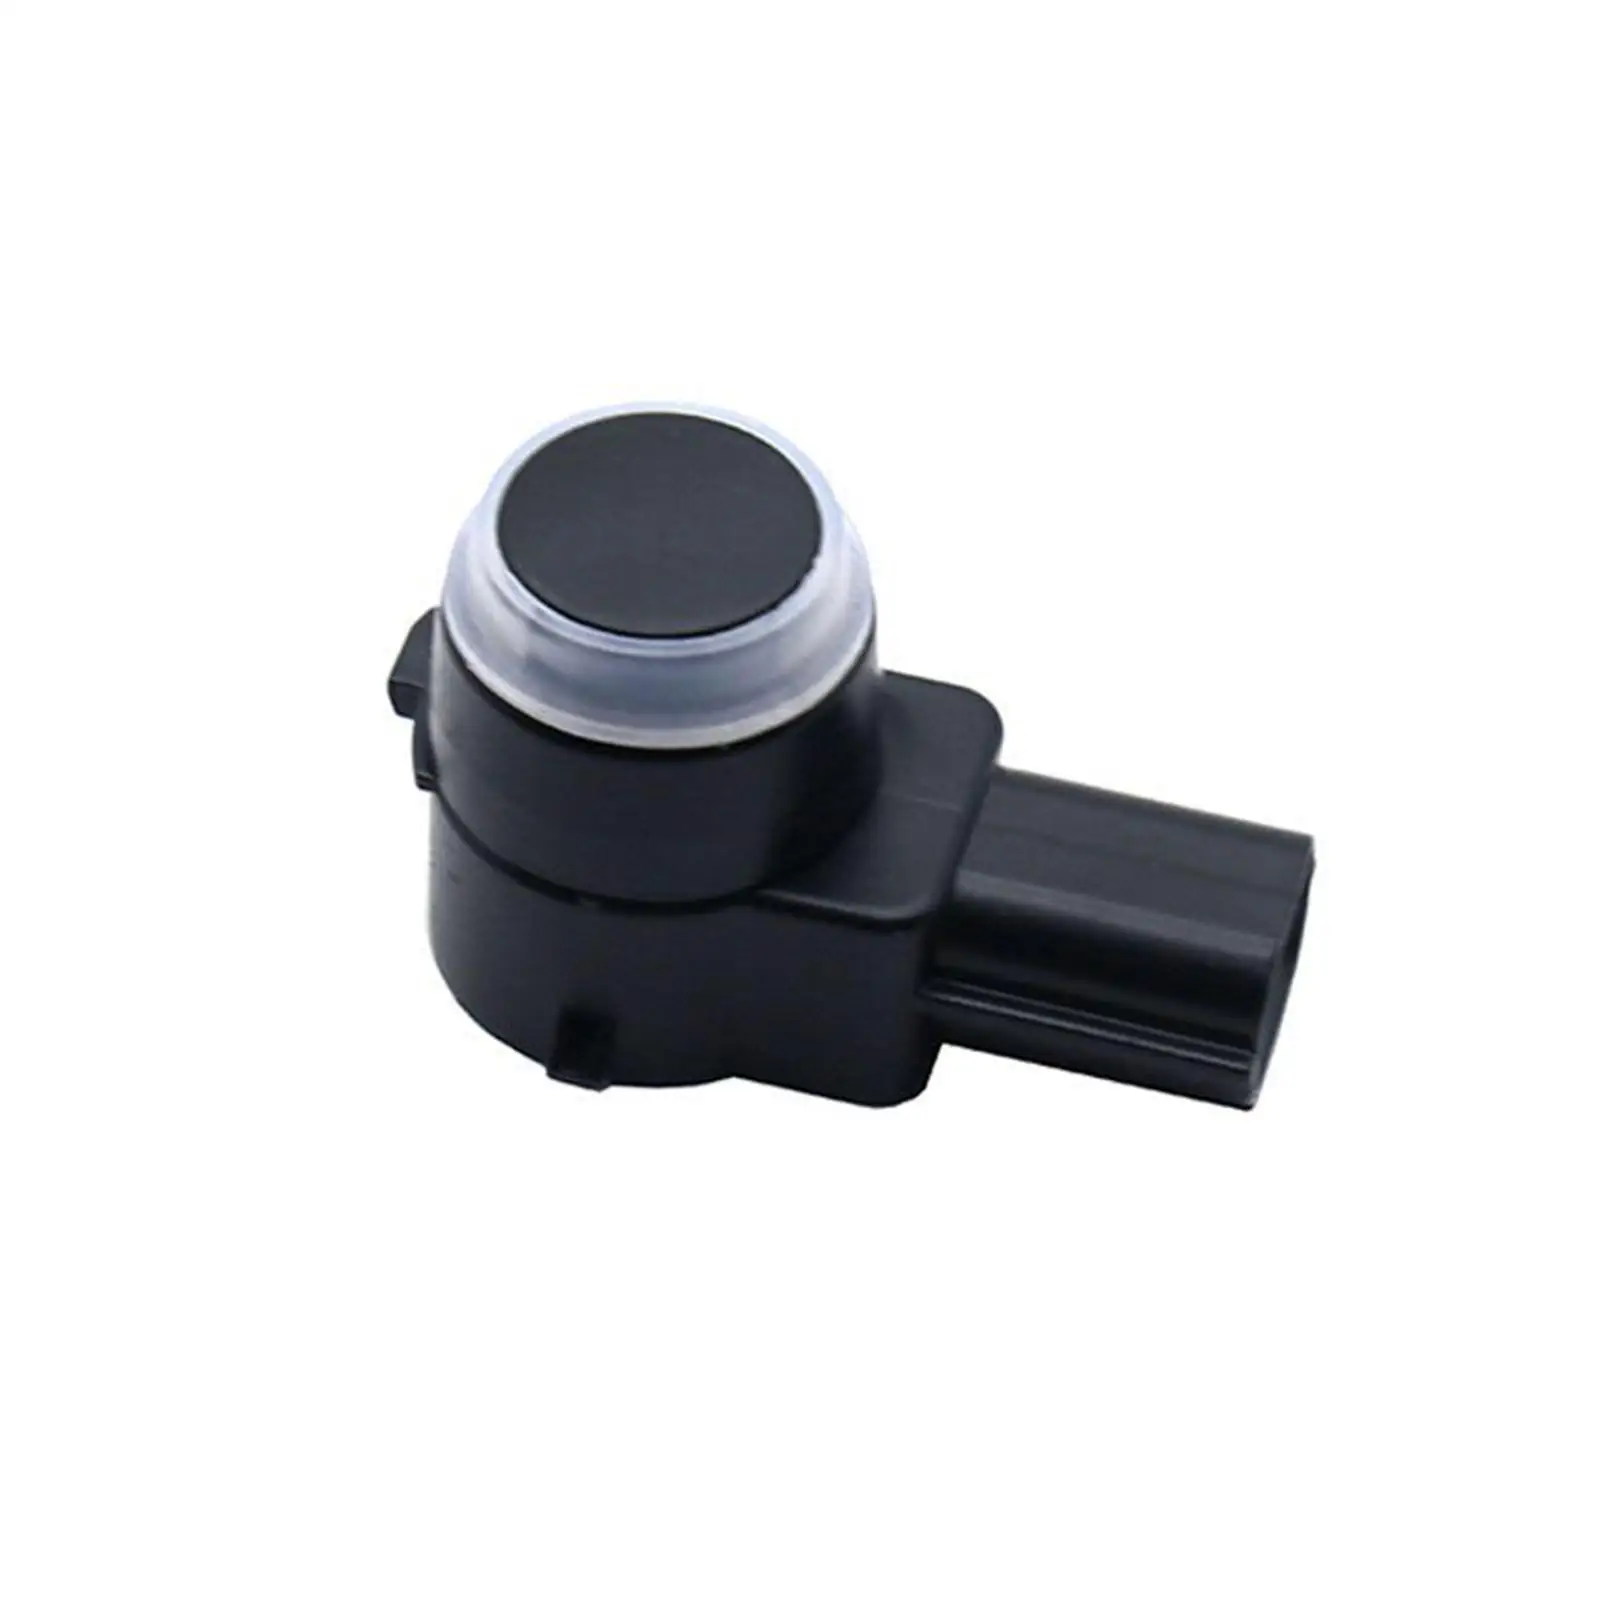 1014388-01-a Easy to Install Assembly Car PDC Parking Assist Sensor Replacement Car Ccessories for Tesla Model S 5yjs 2012